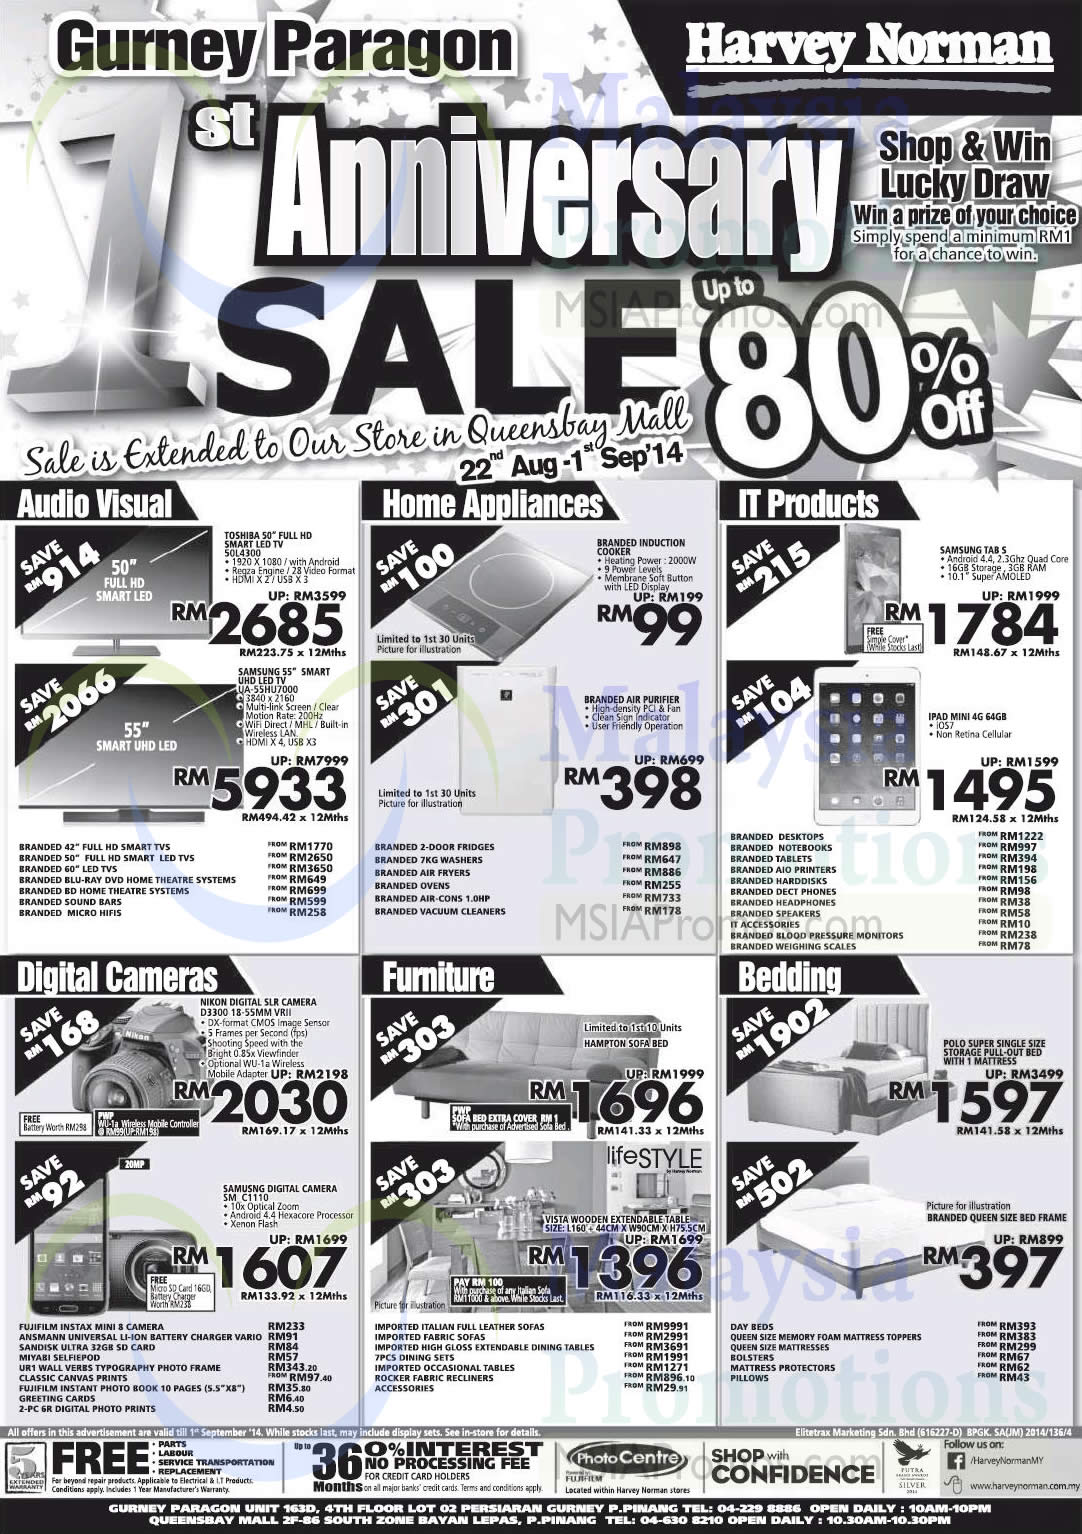 Featured image for Harvey Norman Anniversary Sale @ Gurney Paragon & Queensbay Mall 22 Aug - 1 Sep 2014